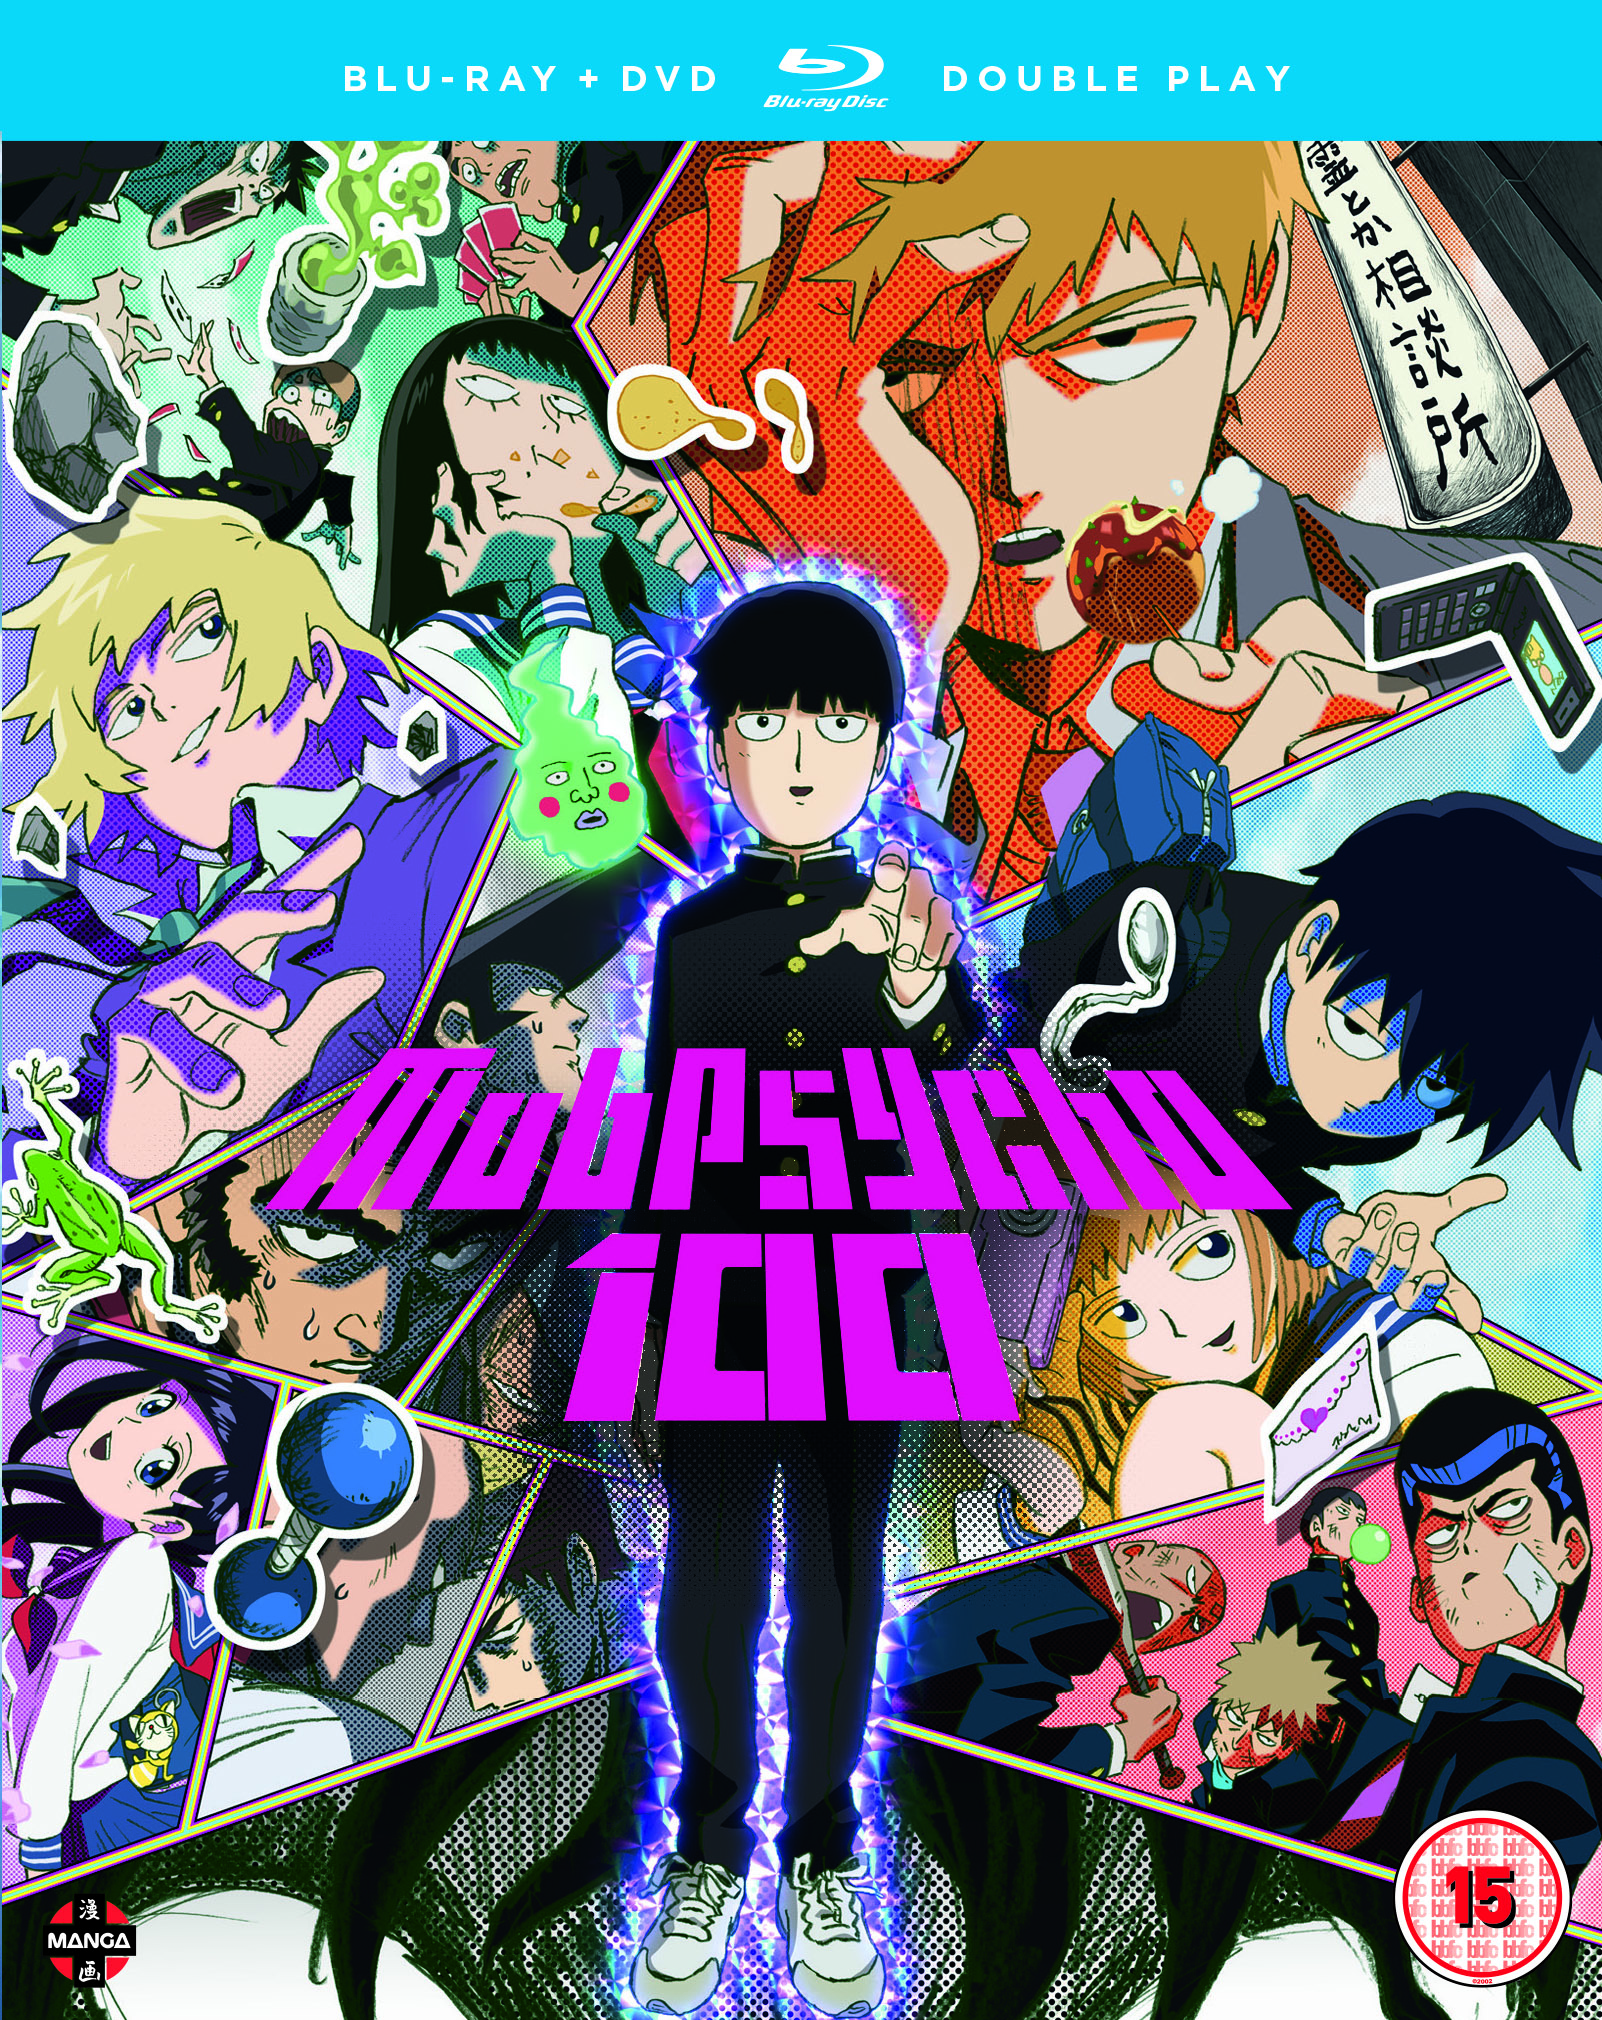 Speed Draw of Some Mob Psycho Art I made recently!! : r/Mobpsycho100